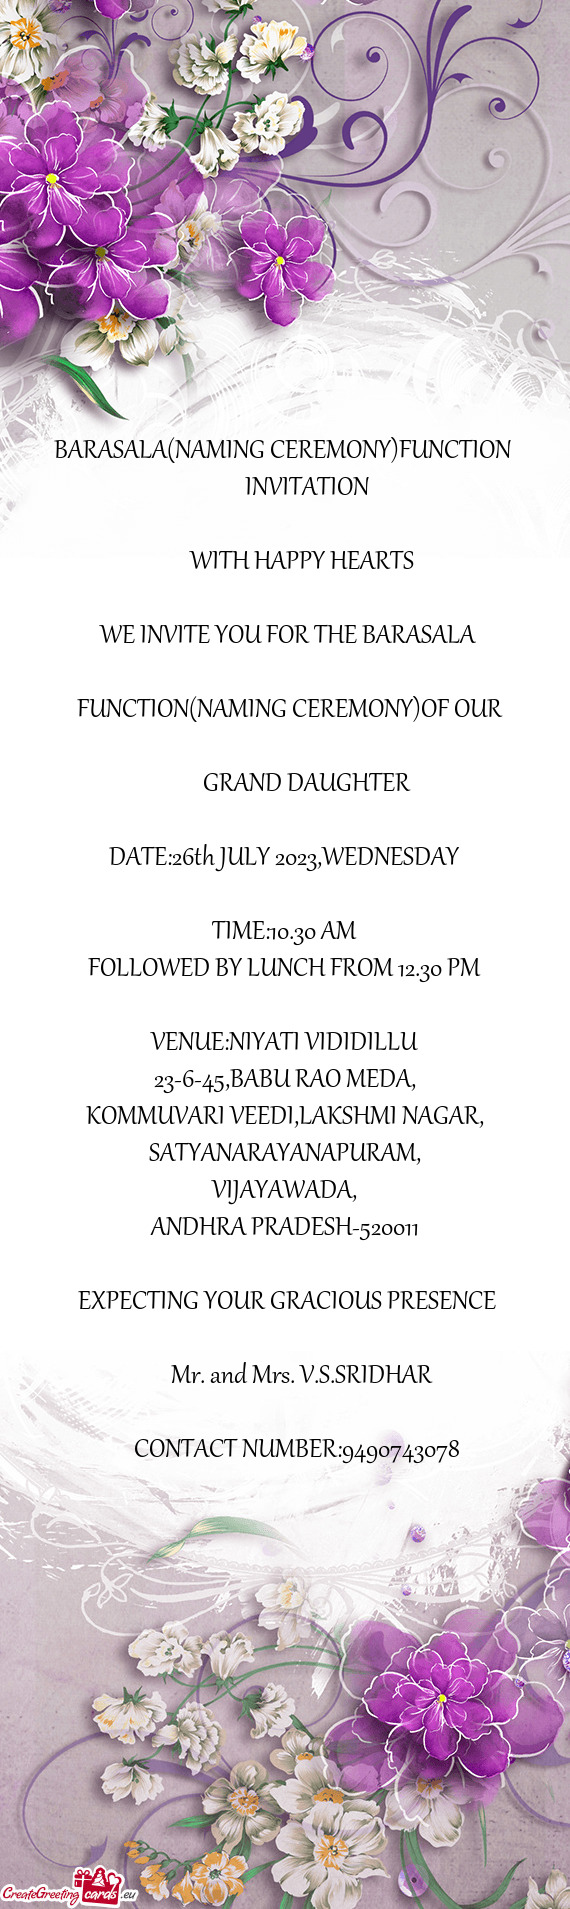 FUNCTION(NAMING CEREMONY)OF OUR